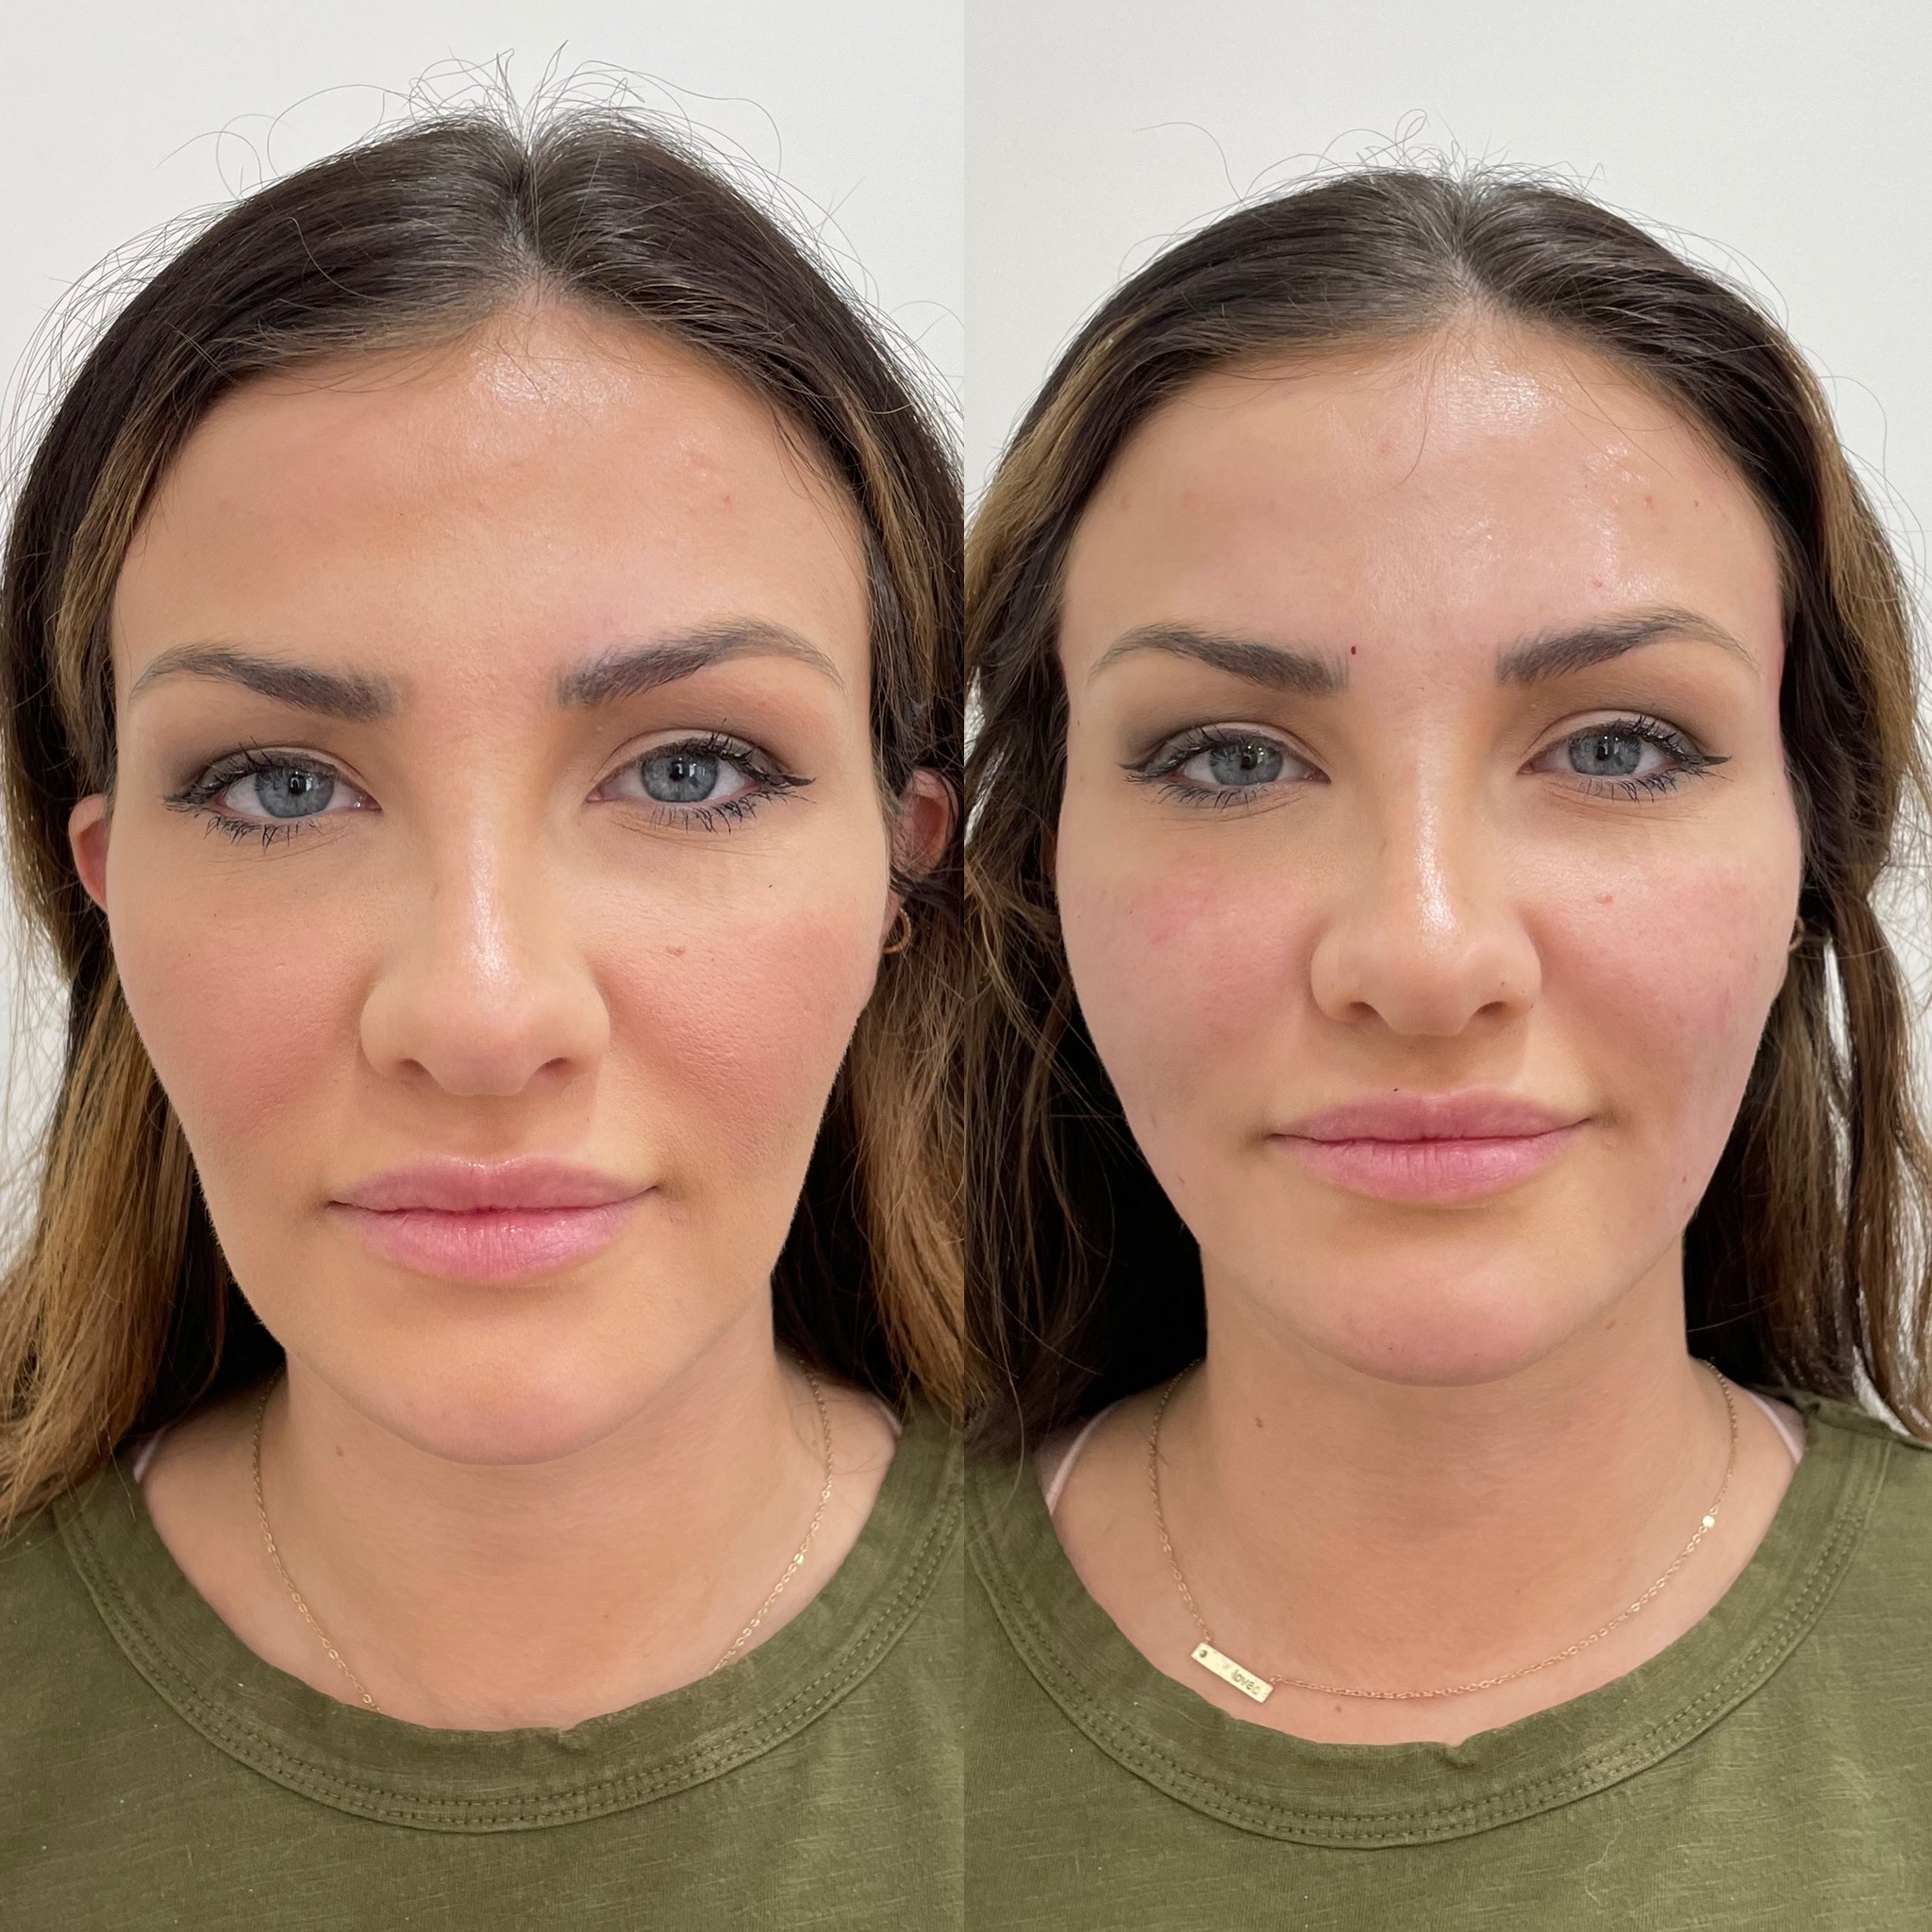 Before and After Thread lift treatment | Beauty Boost Med Spa in Newport Beach, CA